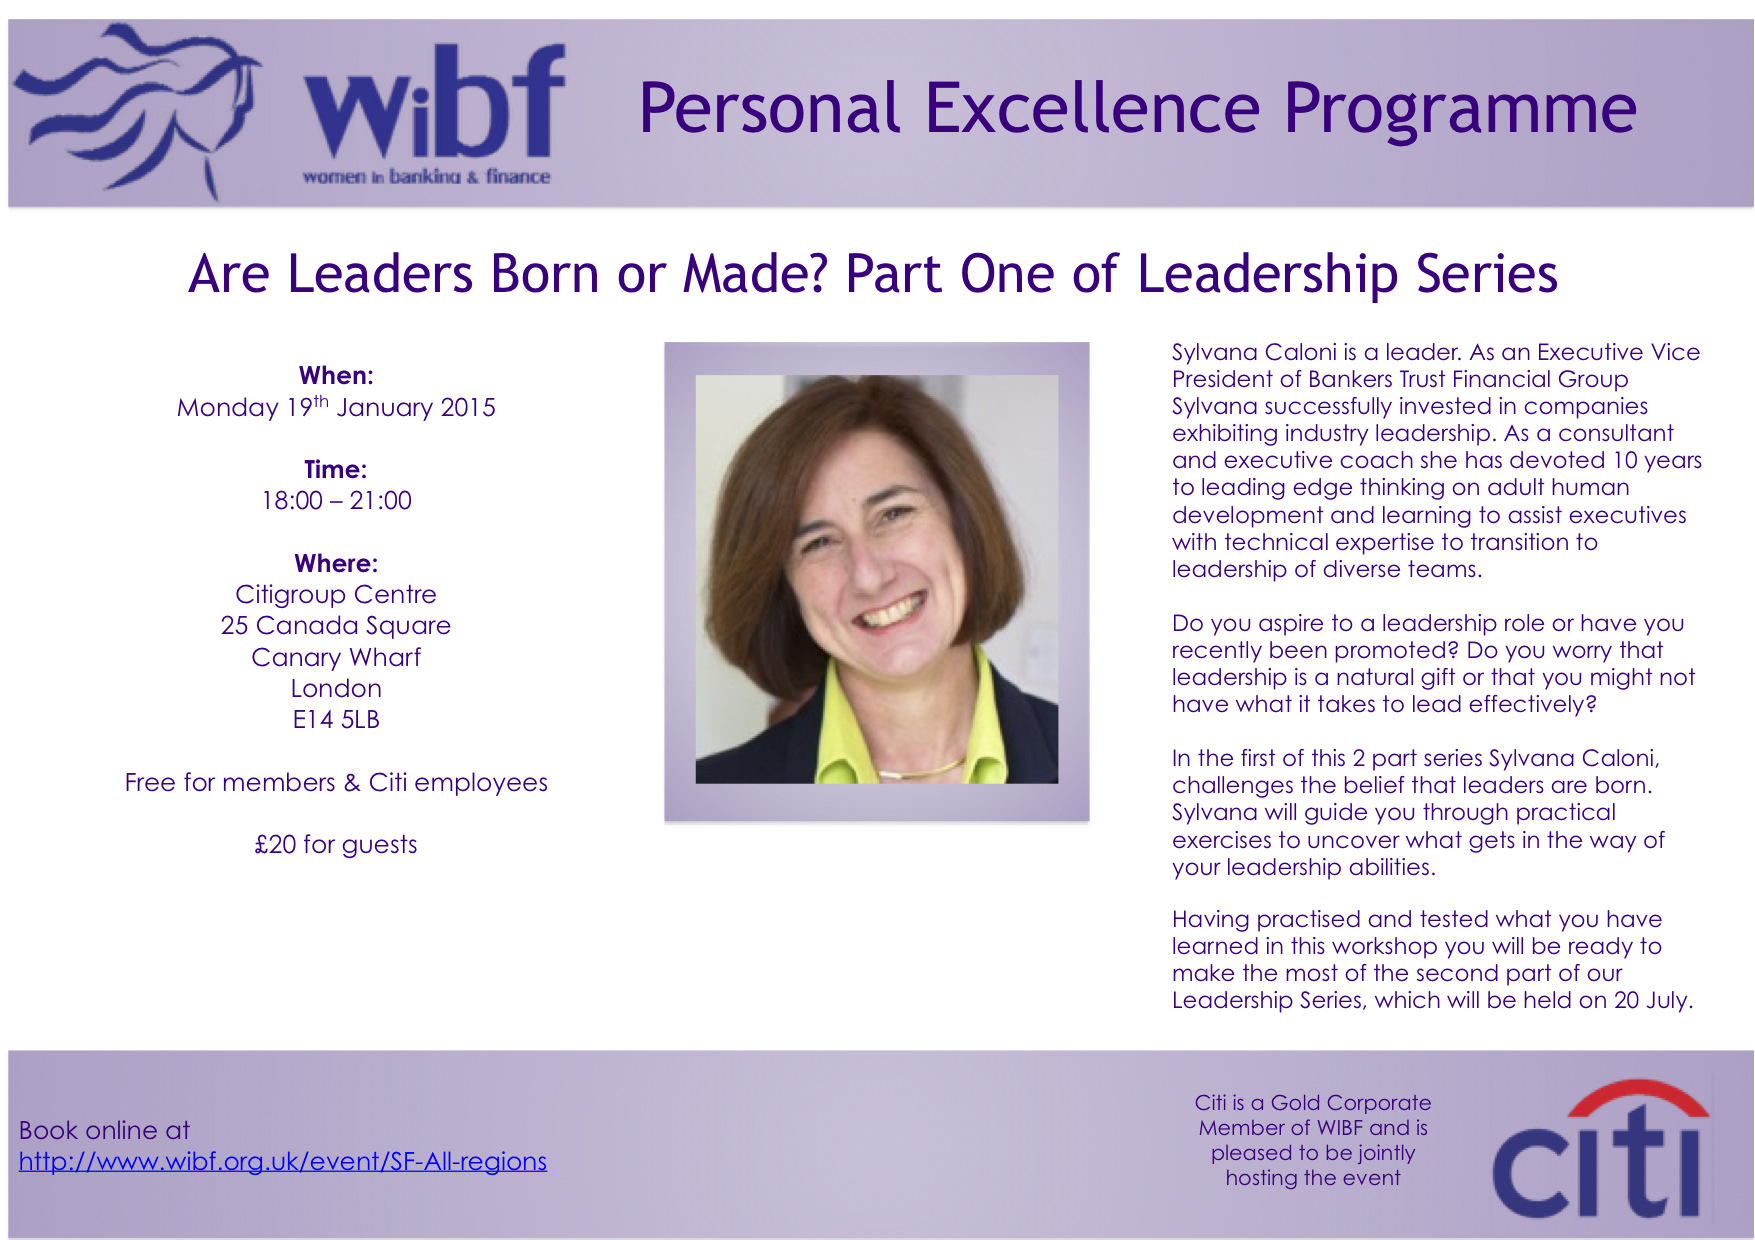 Are Leaders Born or Made?